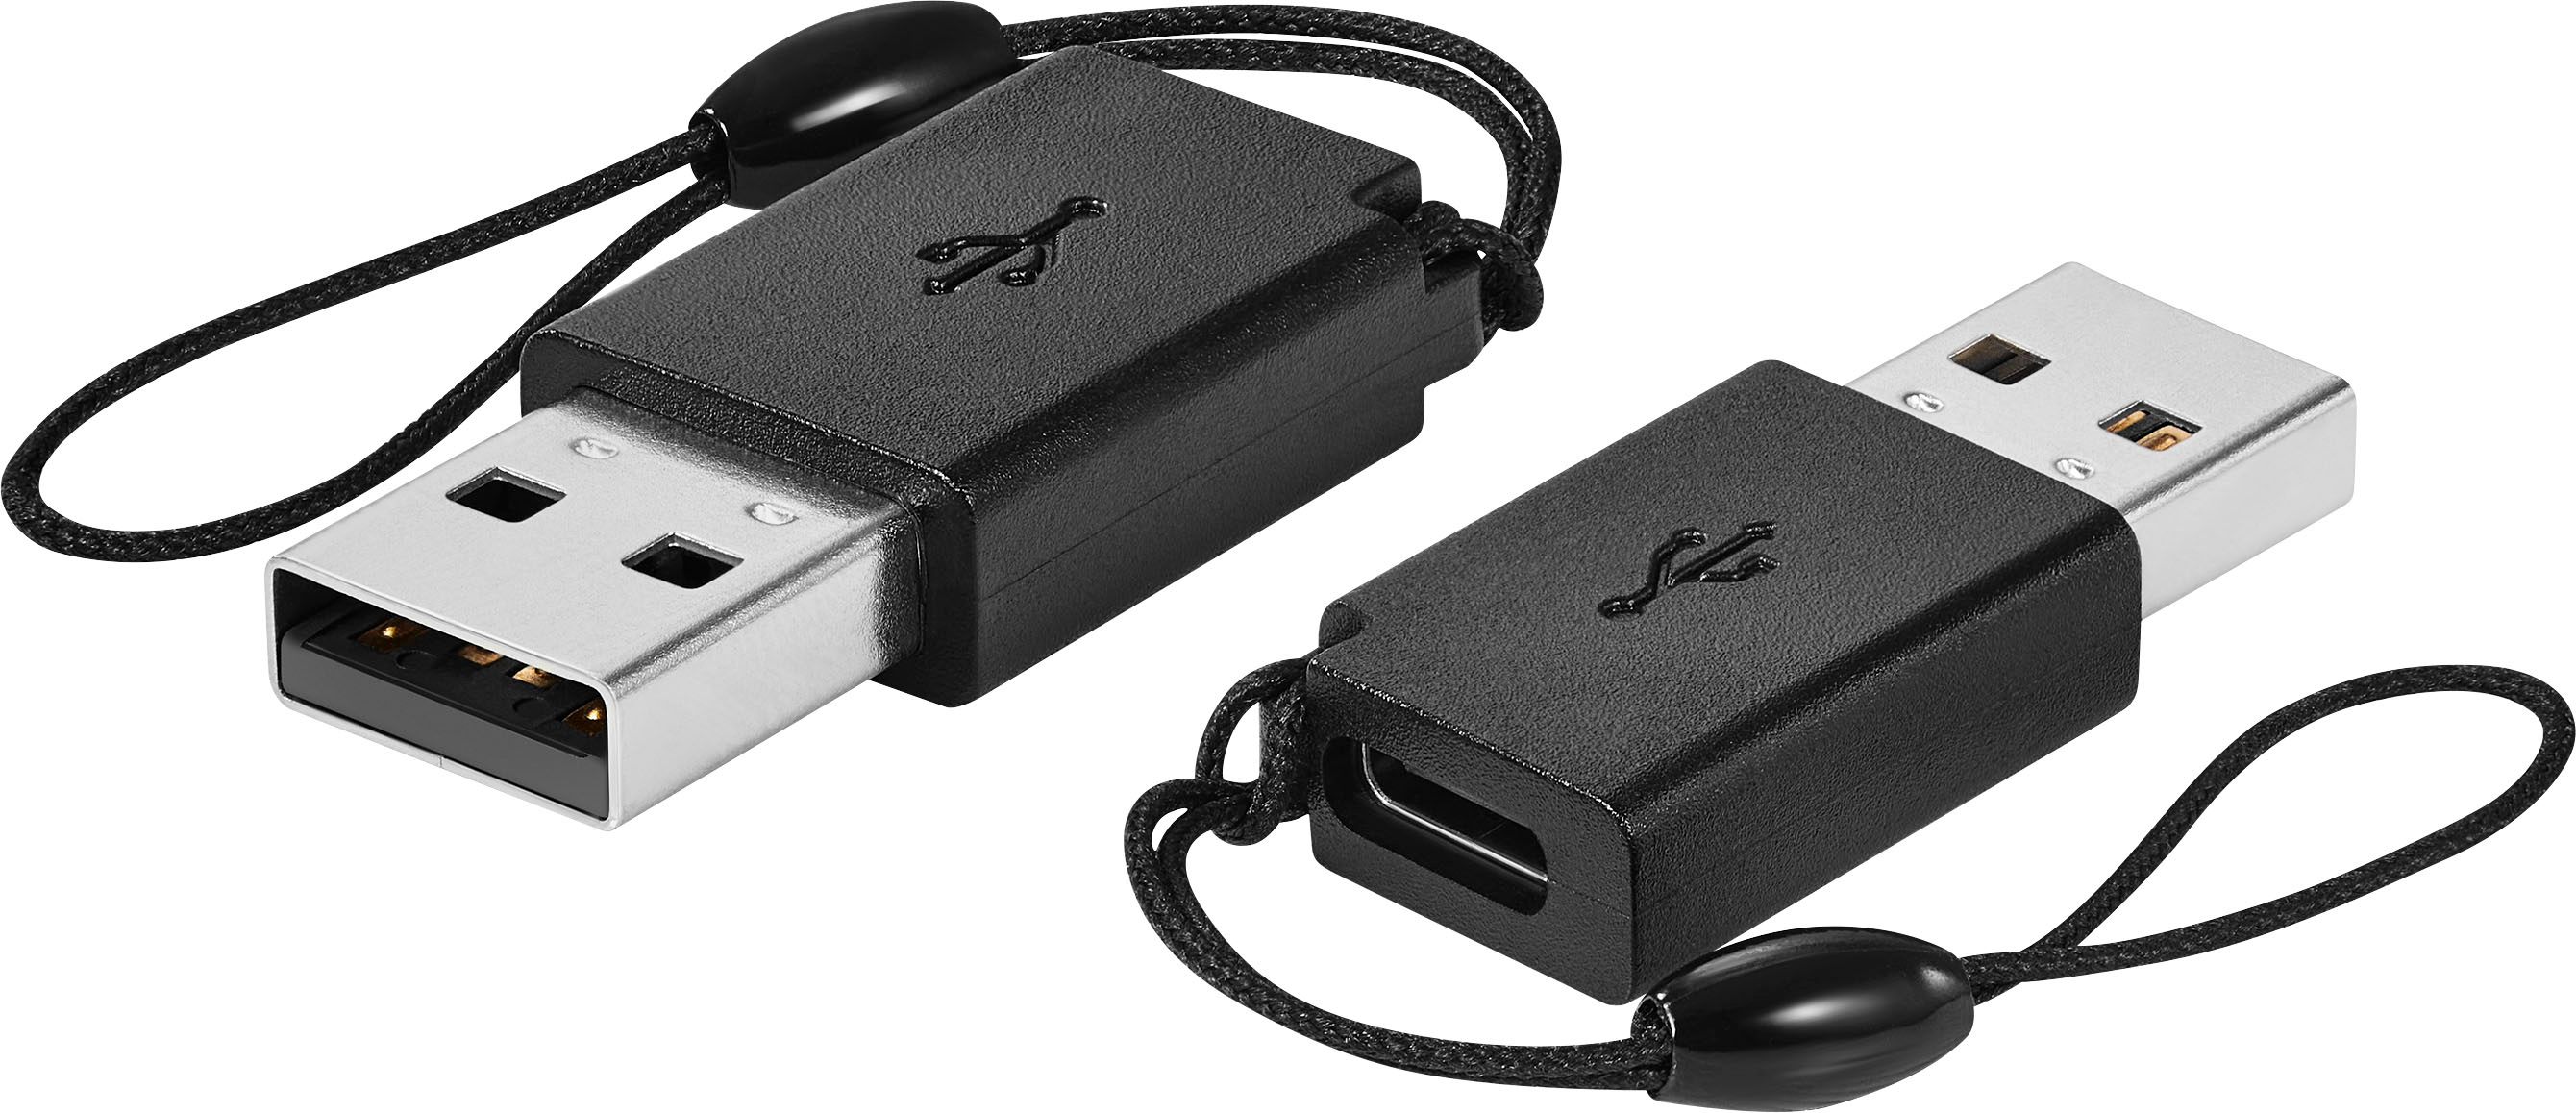 portable laptop charger - Best Buy